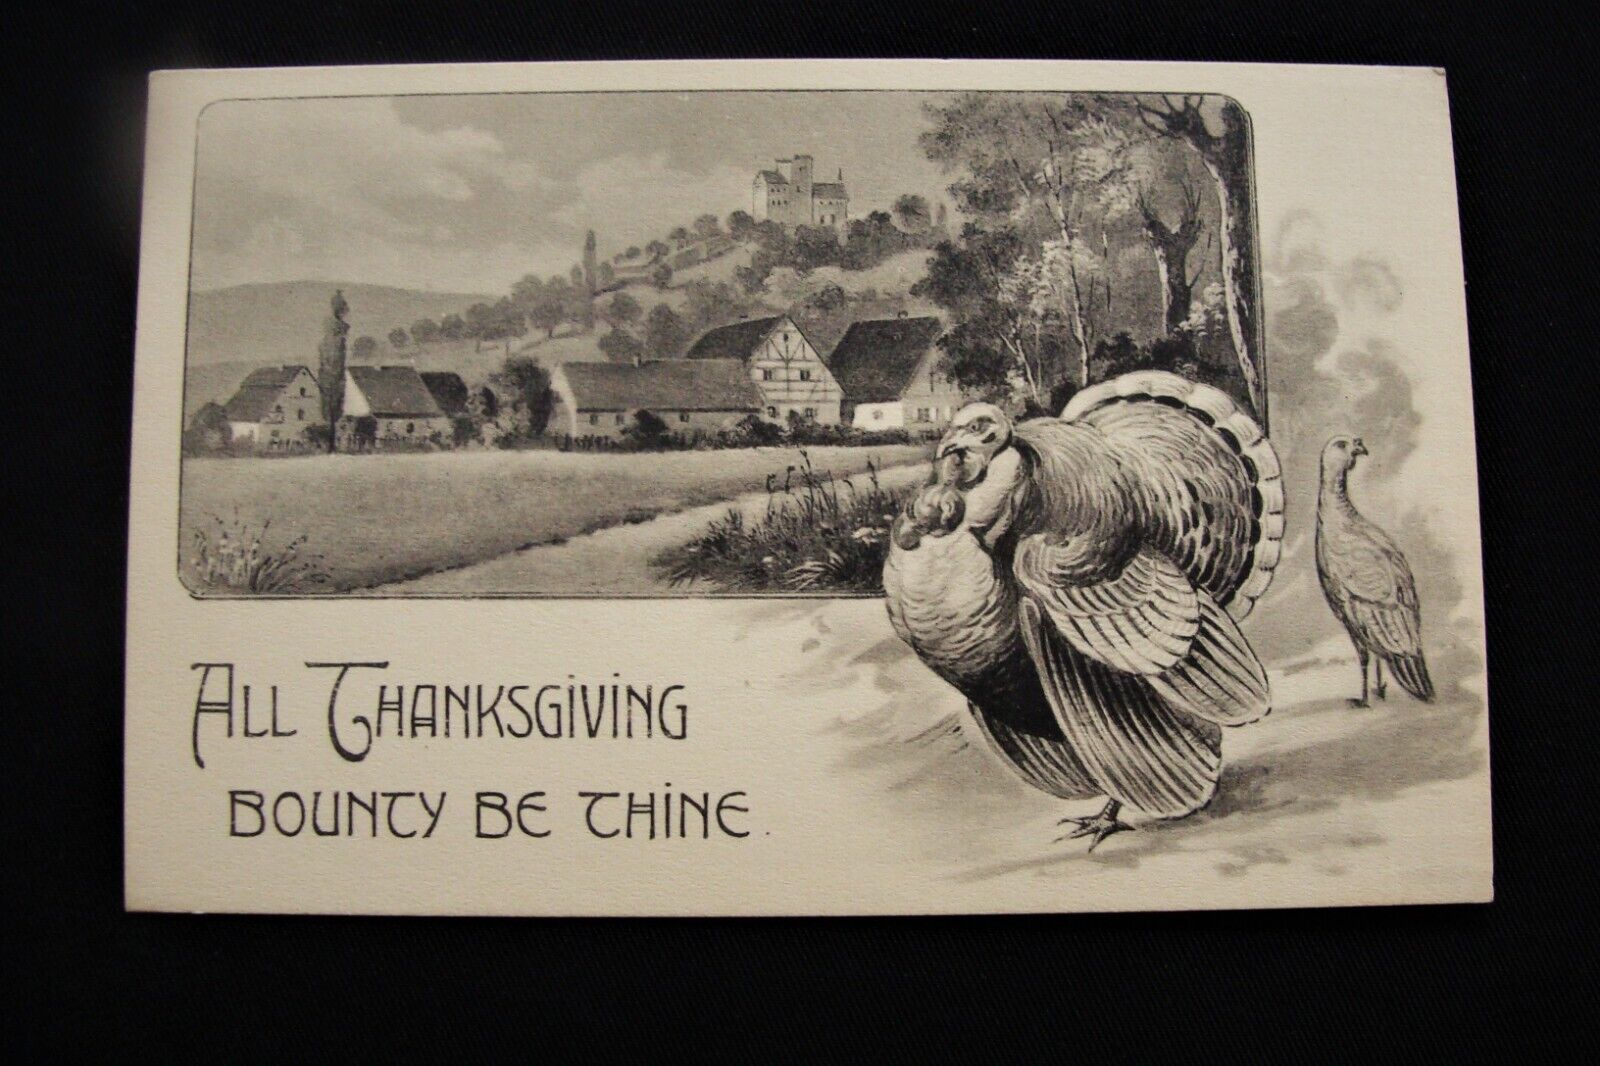 Proud Turkey by Farm Land All Thanksgiving Bounty Be Thine Postcard